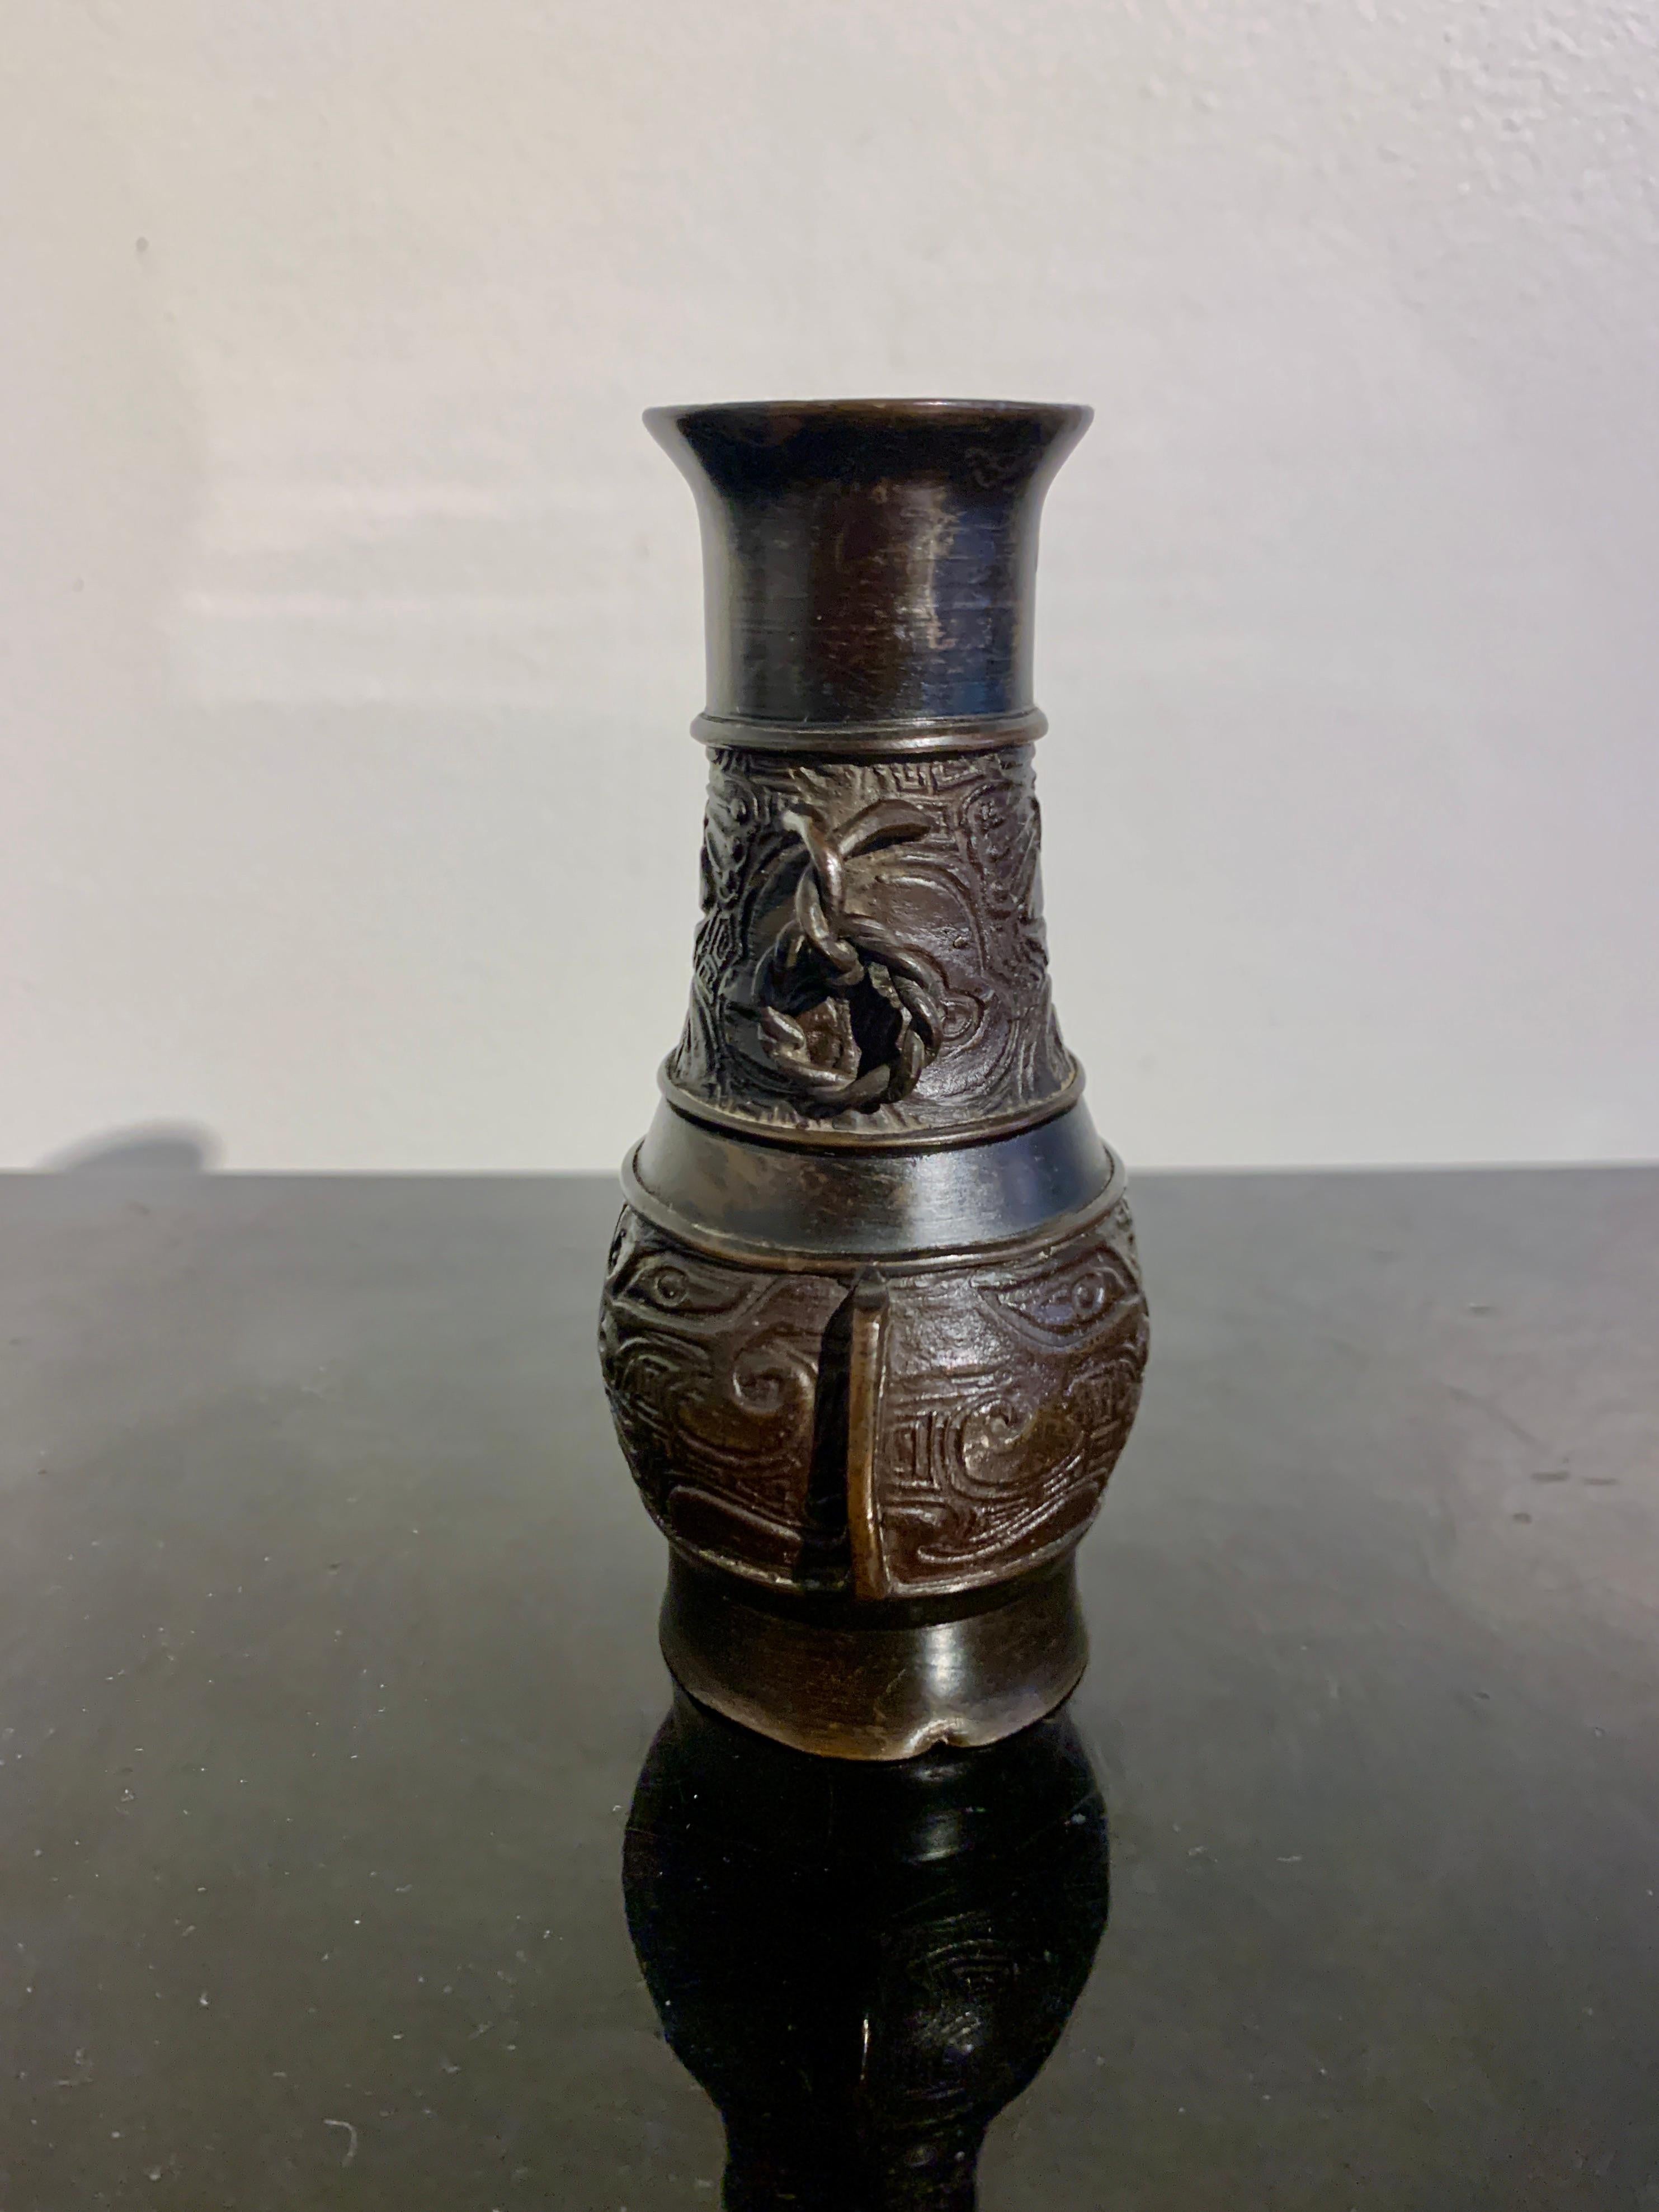 A small and interesting cast bronze archaistic scholar vase with loose ring handles and taotie mask design, late Ming or early Qing Dynasty, mid 17th century, China.

The small vase of archaistic hu form, and cast with archaistic designs. Sitting